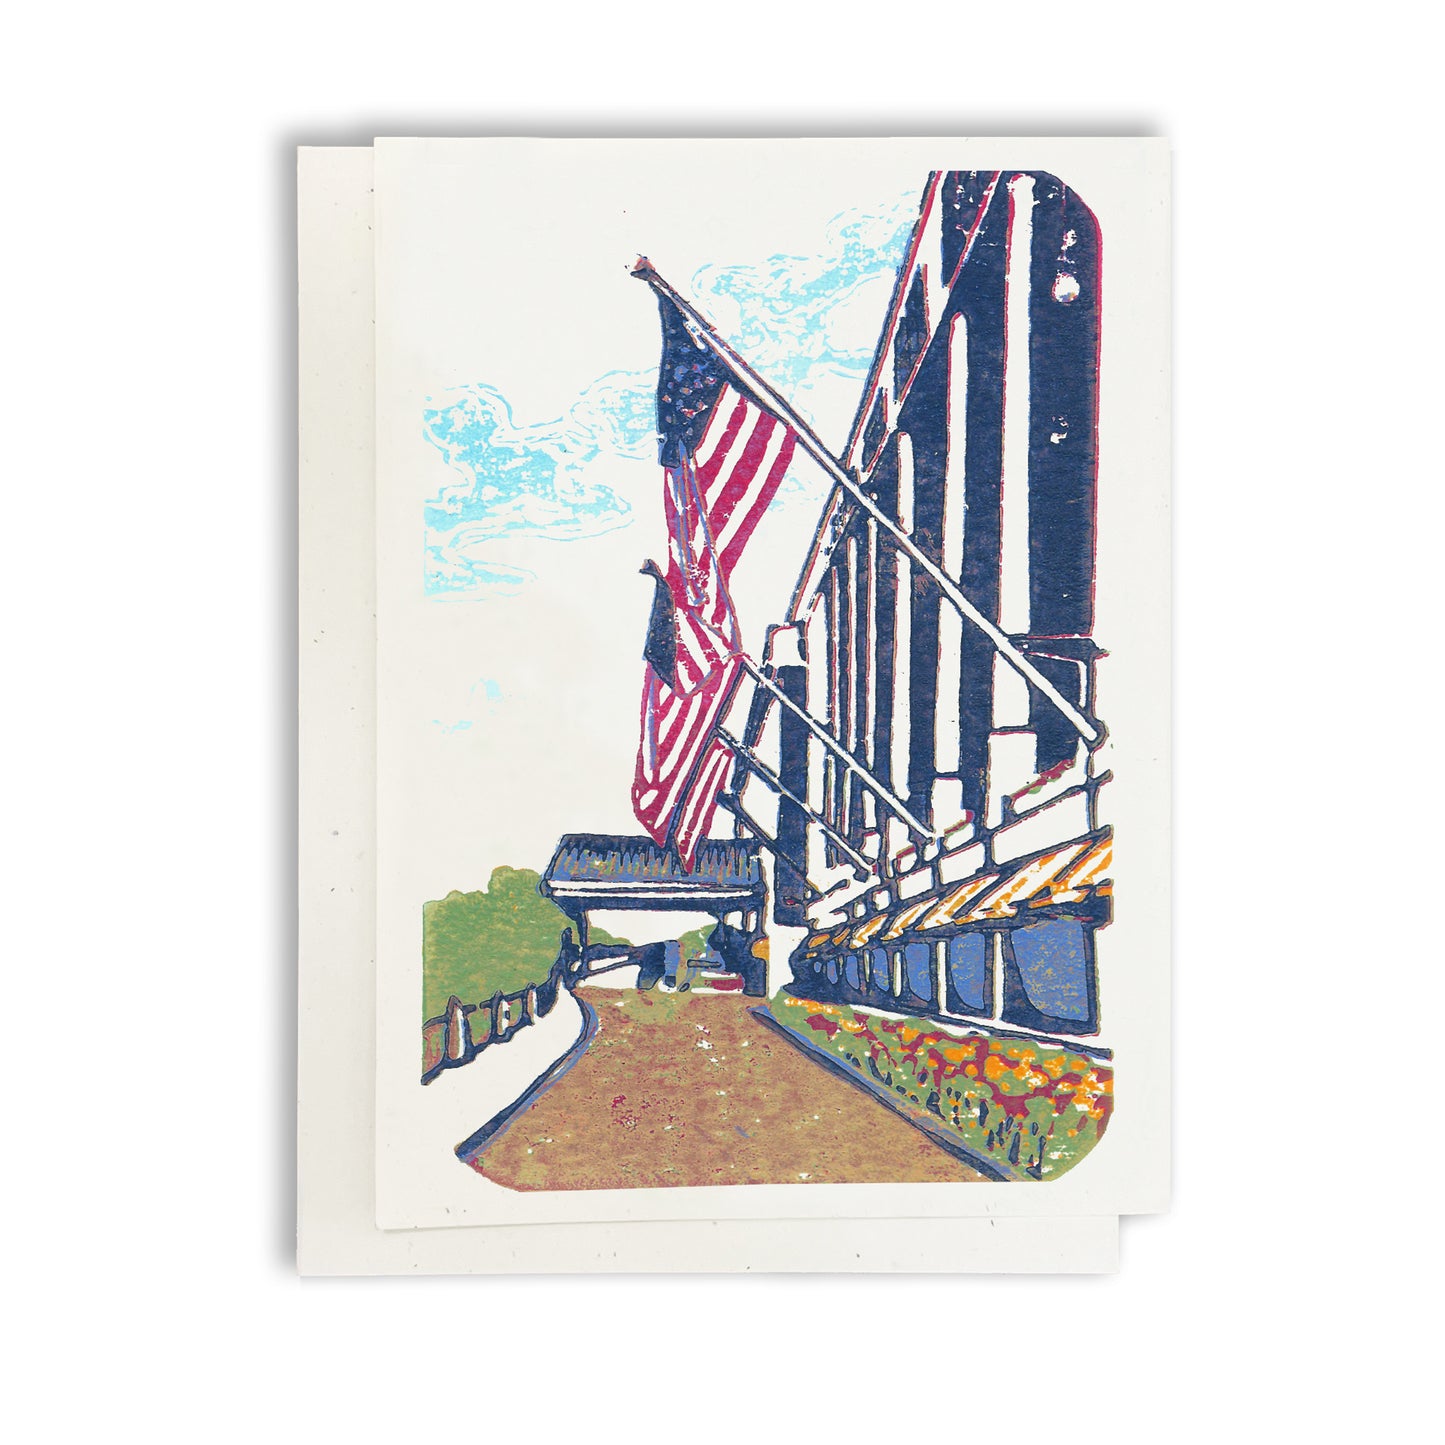 Grand Flags. A casually elegant card featuring a digital reproduction of a block print design with the same title by Natalia Wohletz of Milford and Mackinac Island, Michigan.